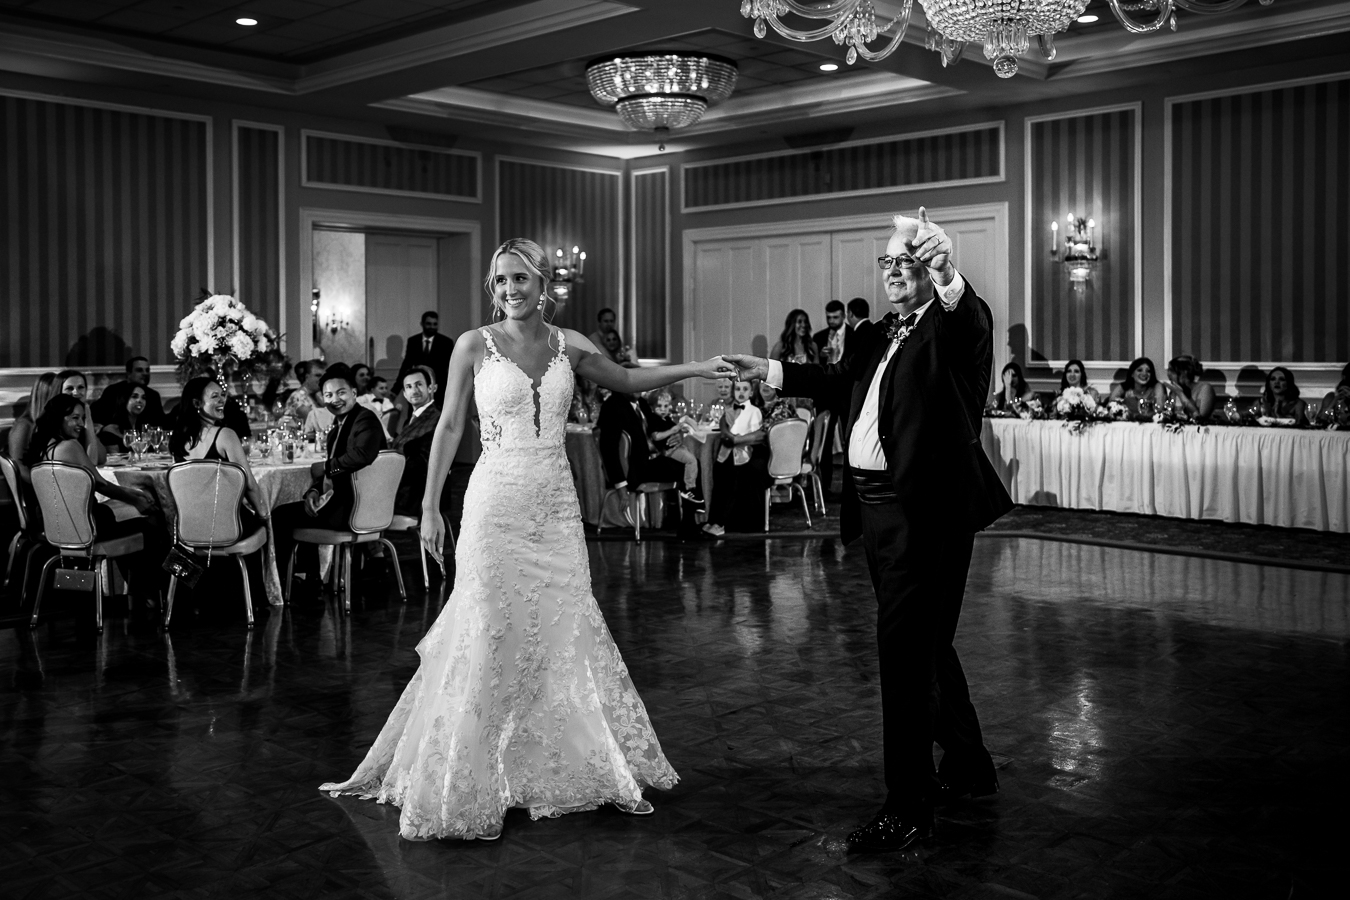 lisa rhinehart captures this black and white image of the bride and her father as they share their father daughter dance together at this Country Club of York Wedding reception